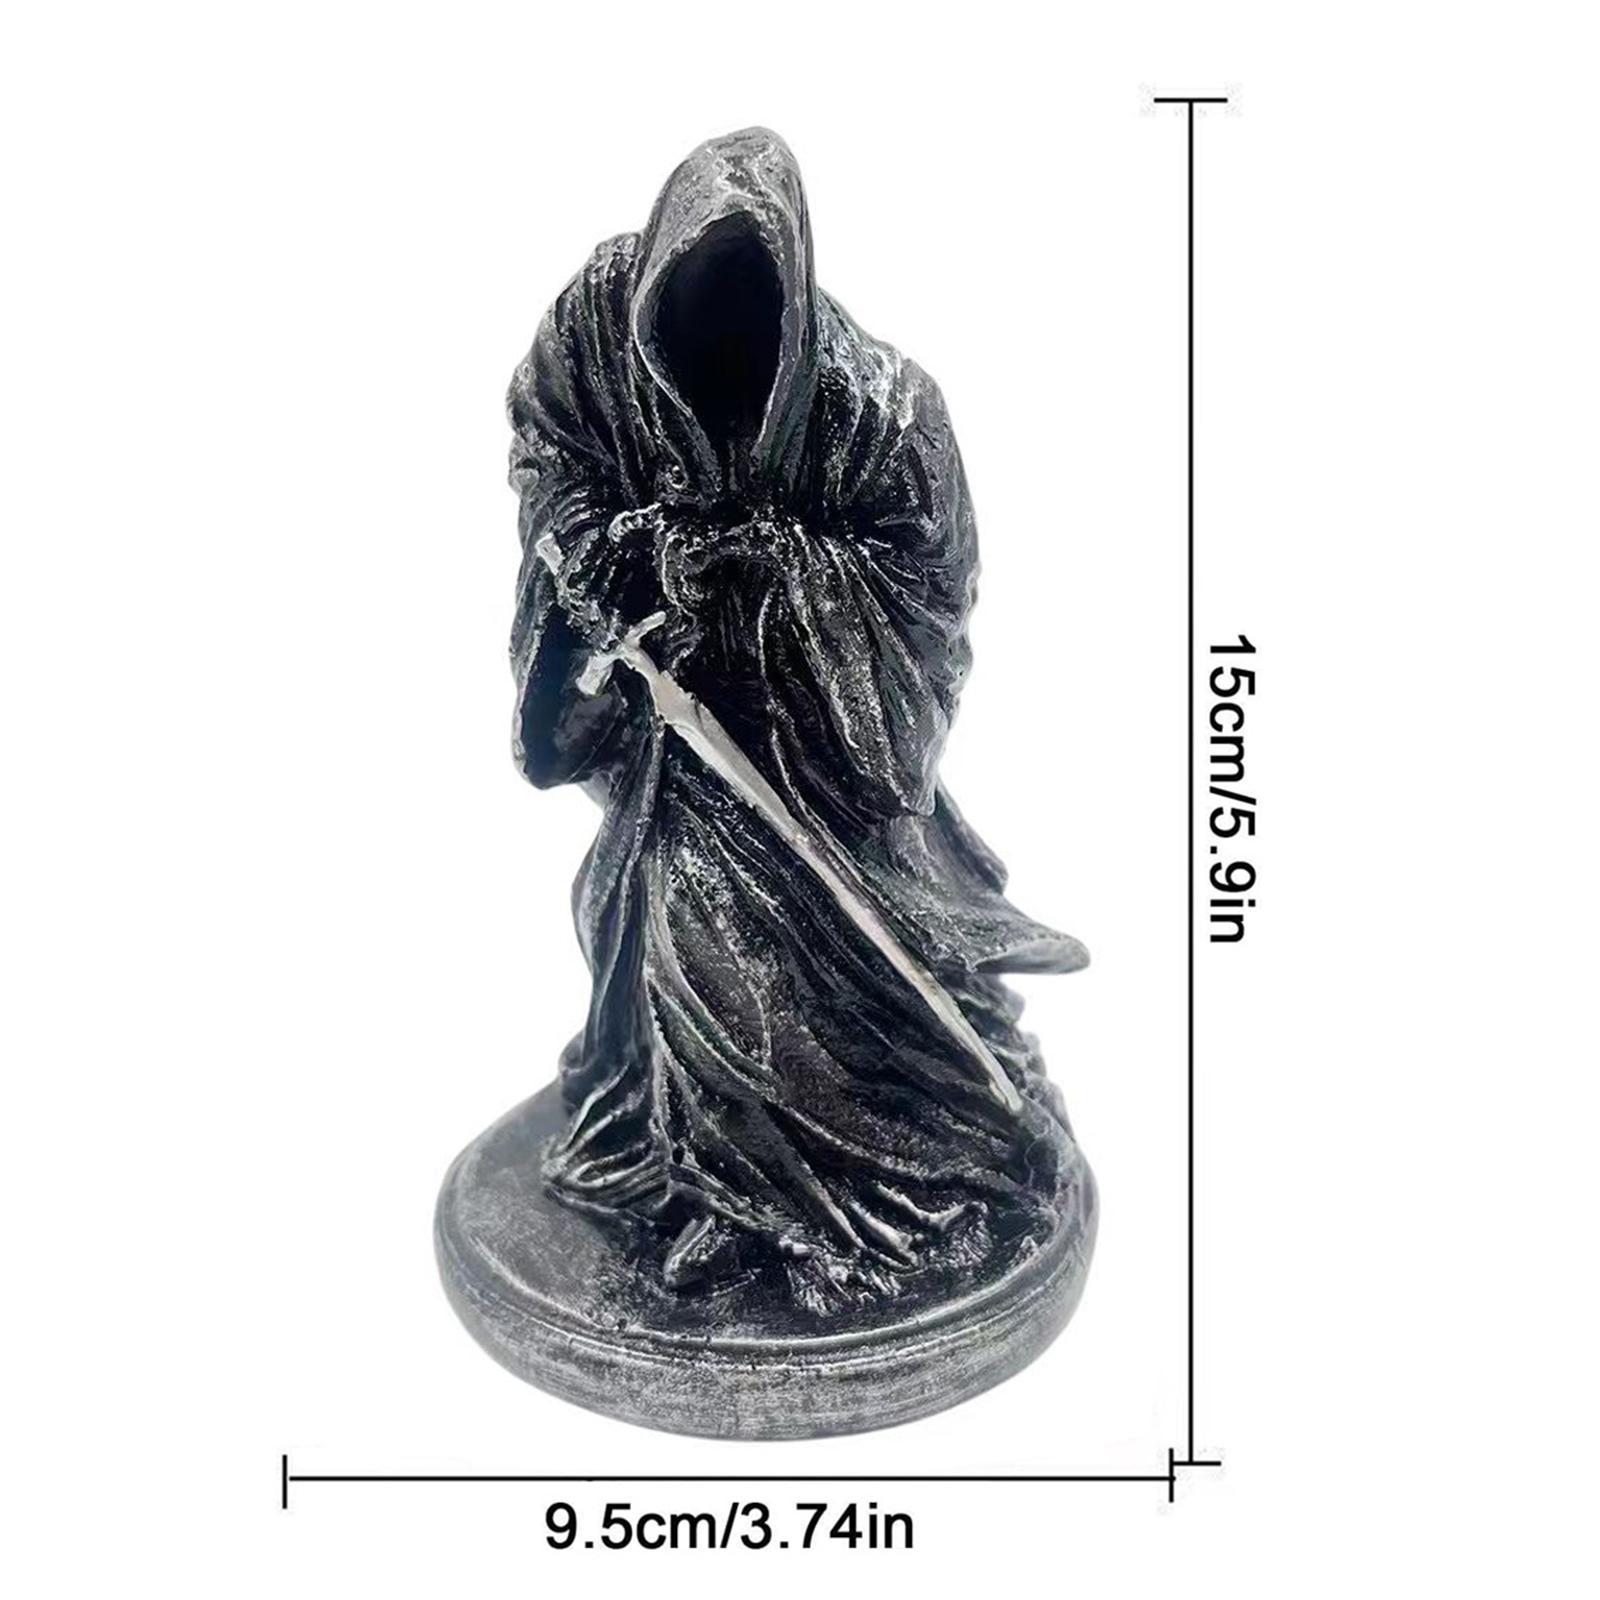 Statue Collectible Decorative Sculpture for Shelf Tabletop Office